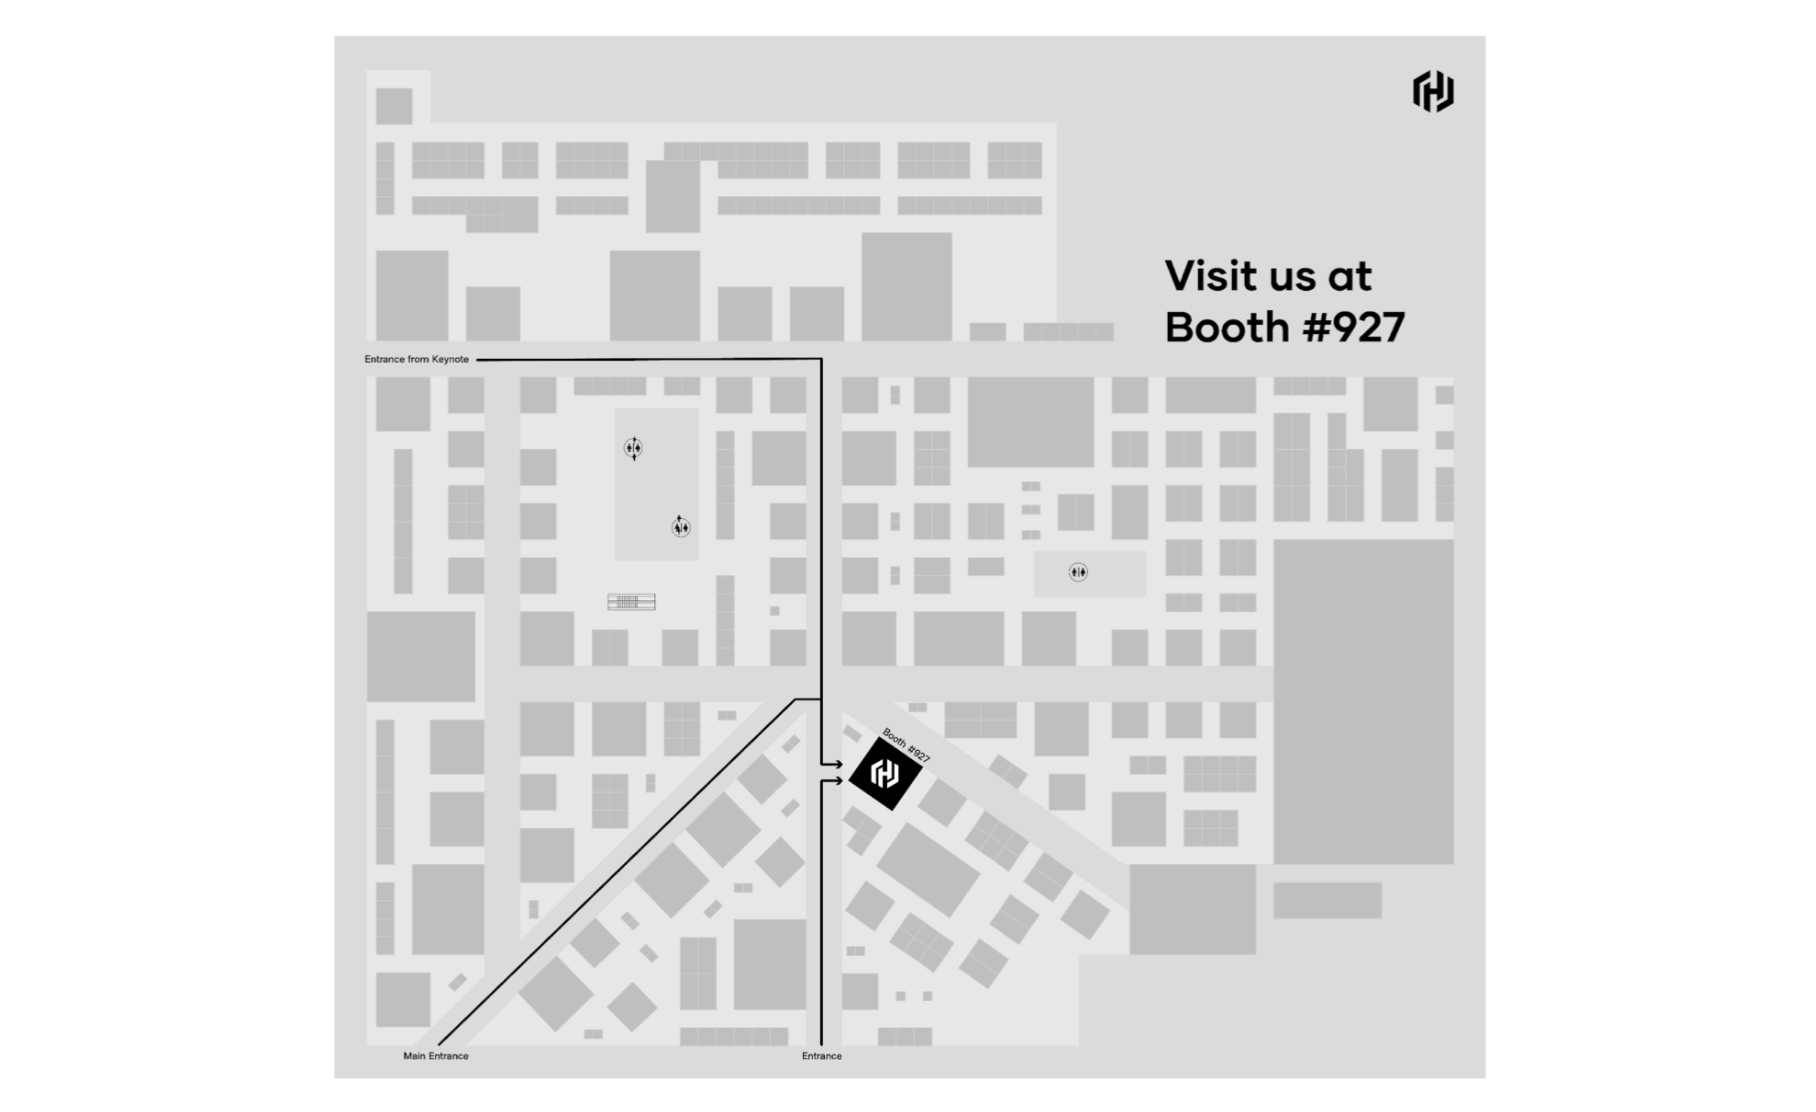 Visit the HashiCorp booth at re:Invent - Booth #927